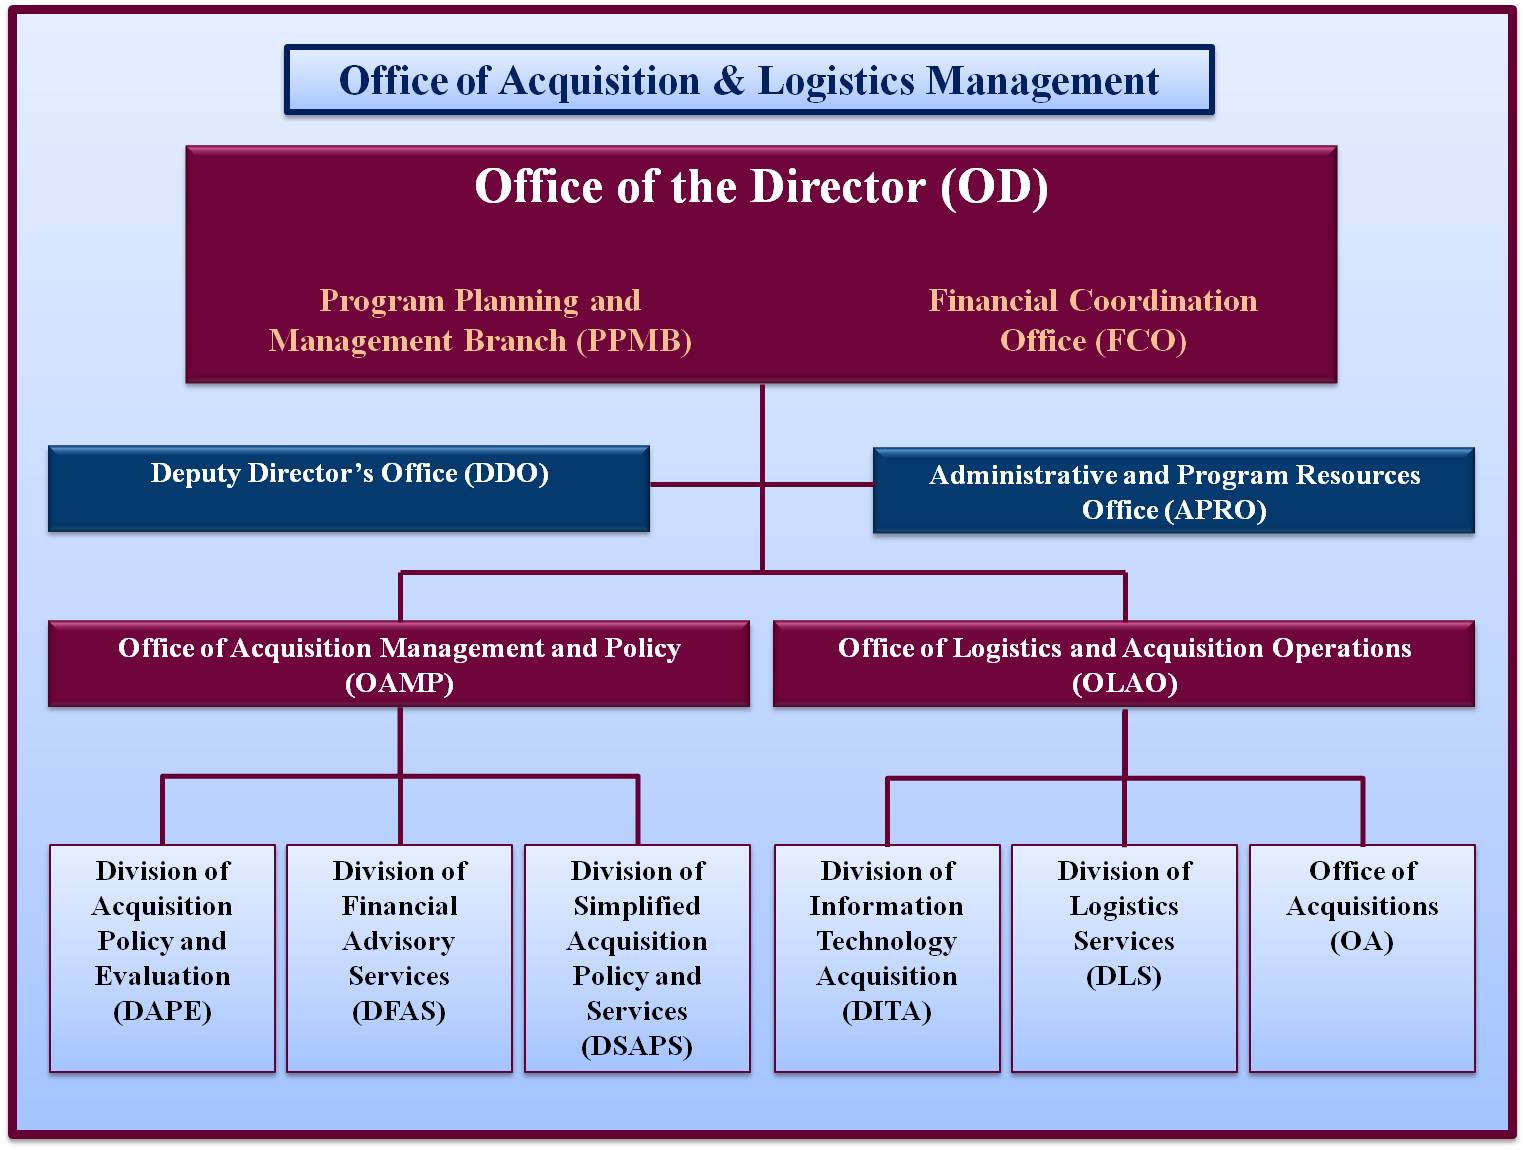 Office of Acquisition and Logistics Management - Hierarchial Structure 